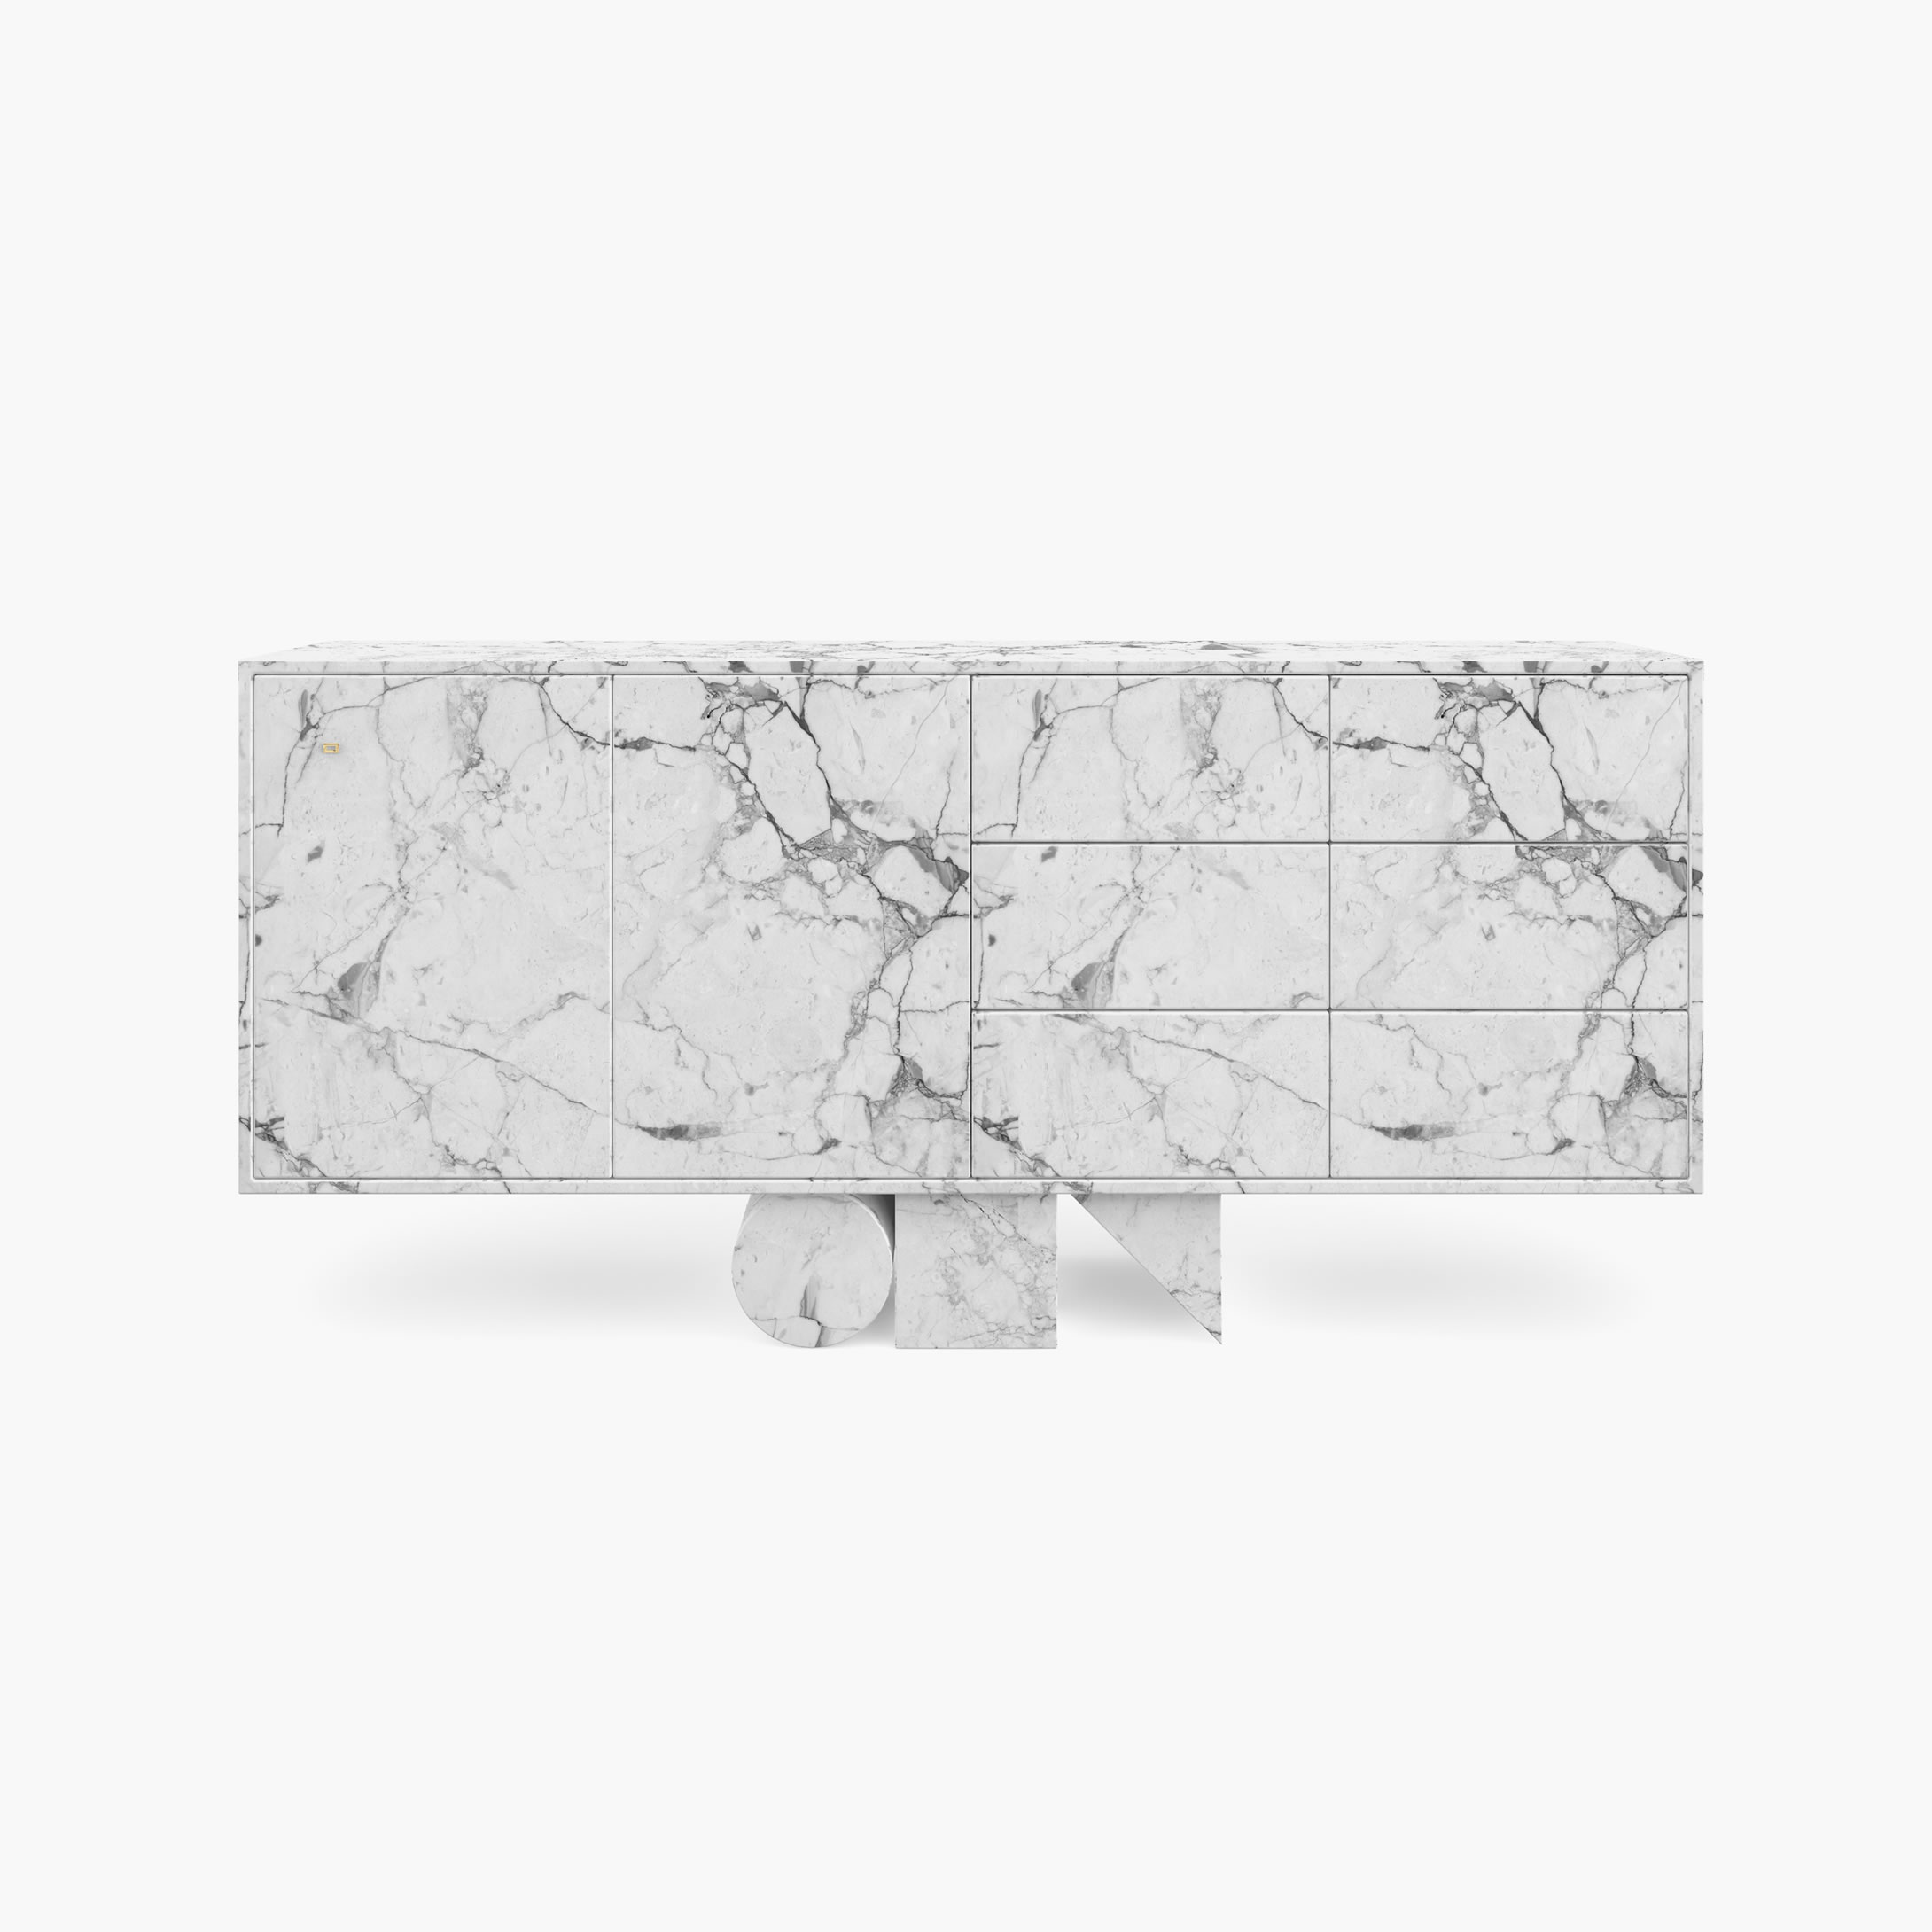 Sideboard Doors drawers White Arabescato Marble architectural Living Room art work Consoles  Sideboards FS 4 FELIX SCHWAKE